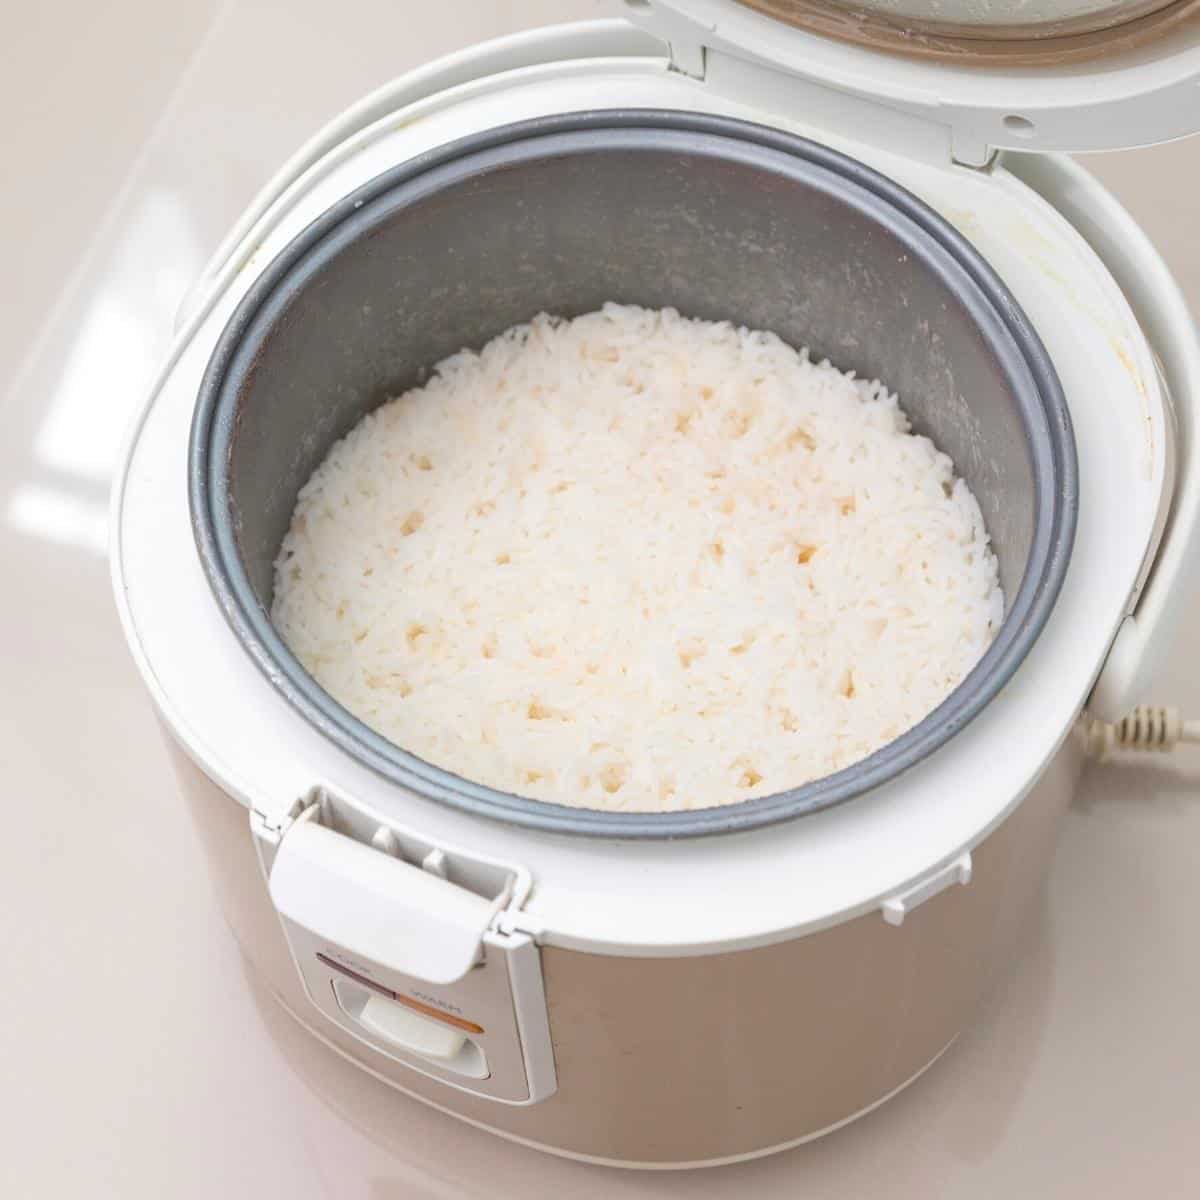 Long grain rice in the rice cooker.